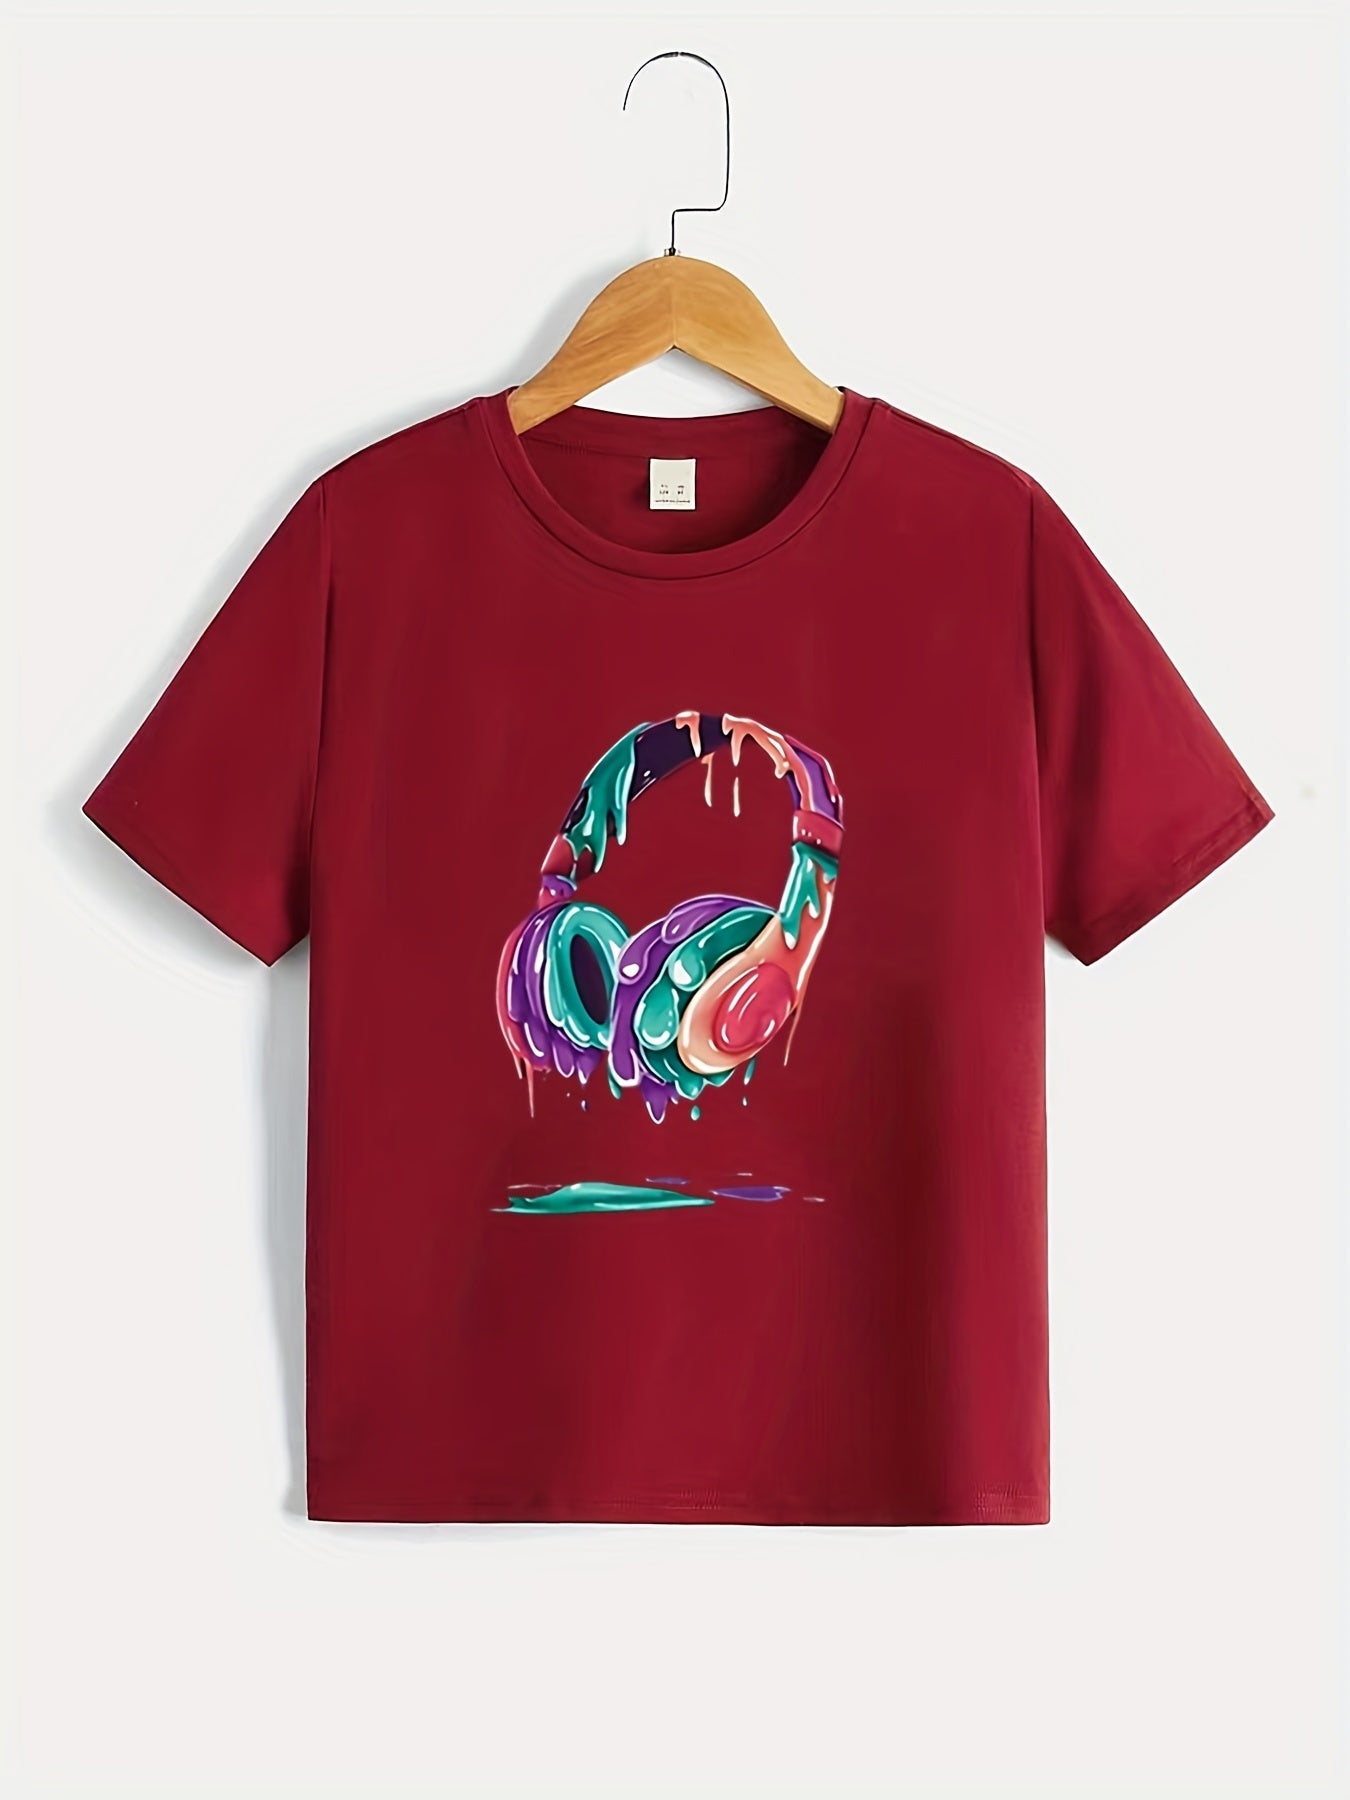 Headphone Graphic Round Neck Cotton T-shirt Tees Tops Casual Soft Comfortable Boys And Girls Summer Clothes